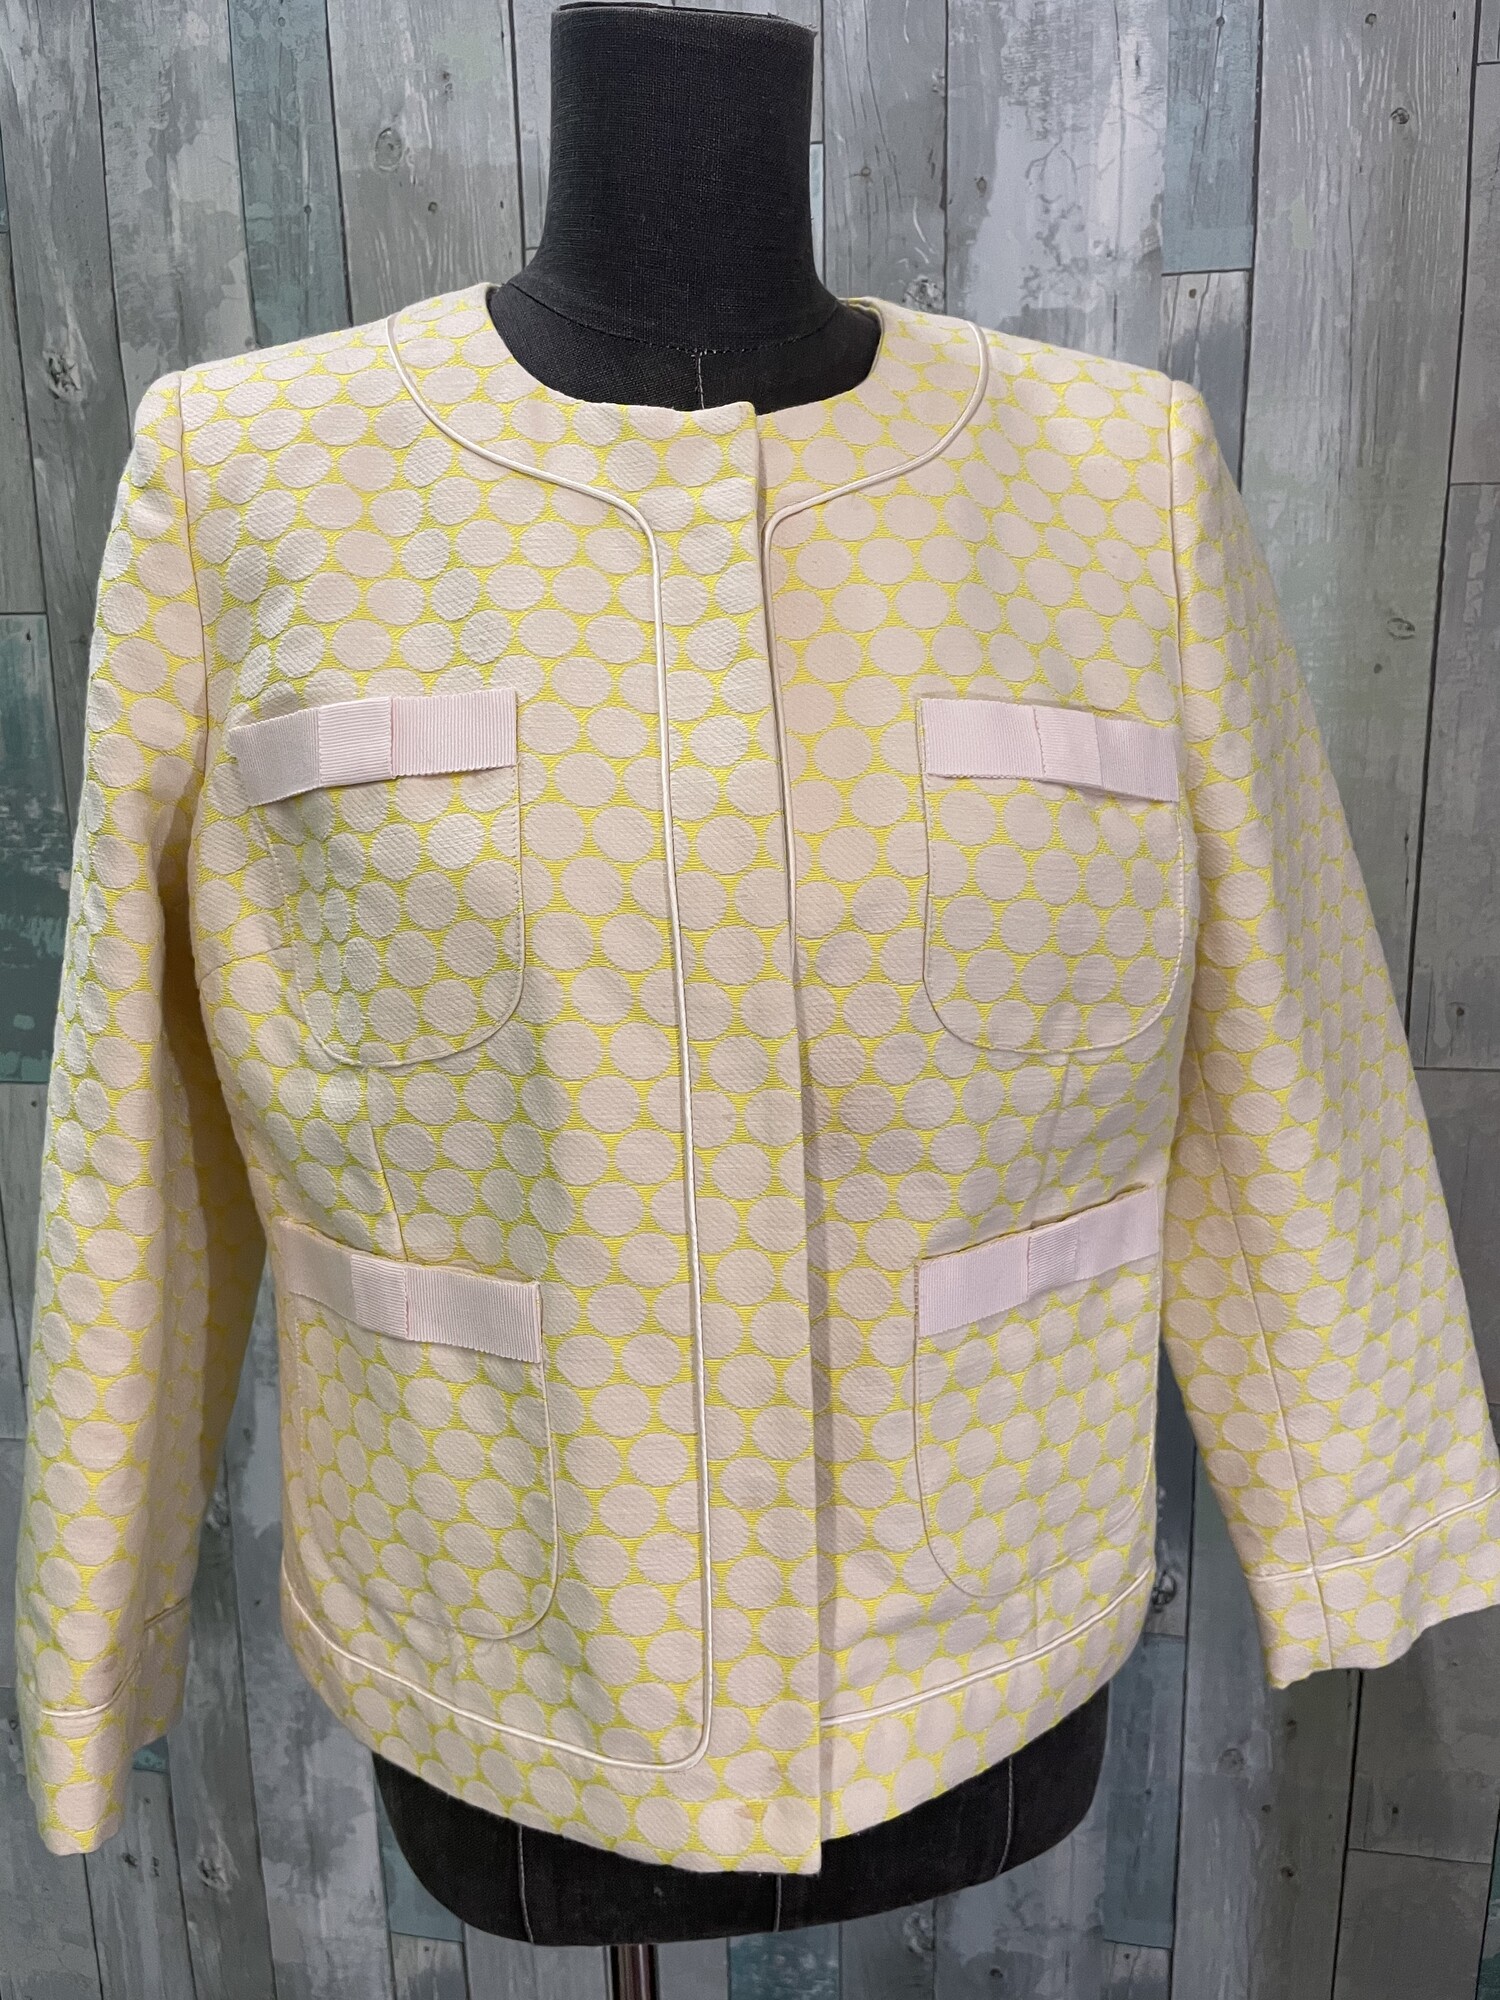 Boden Blazer
Cream & yellow
Fully lined, ribbon detail pockets
Size: 10